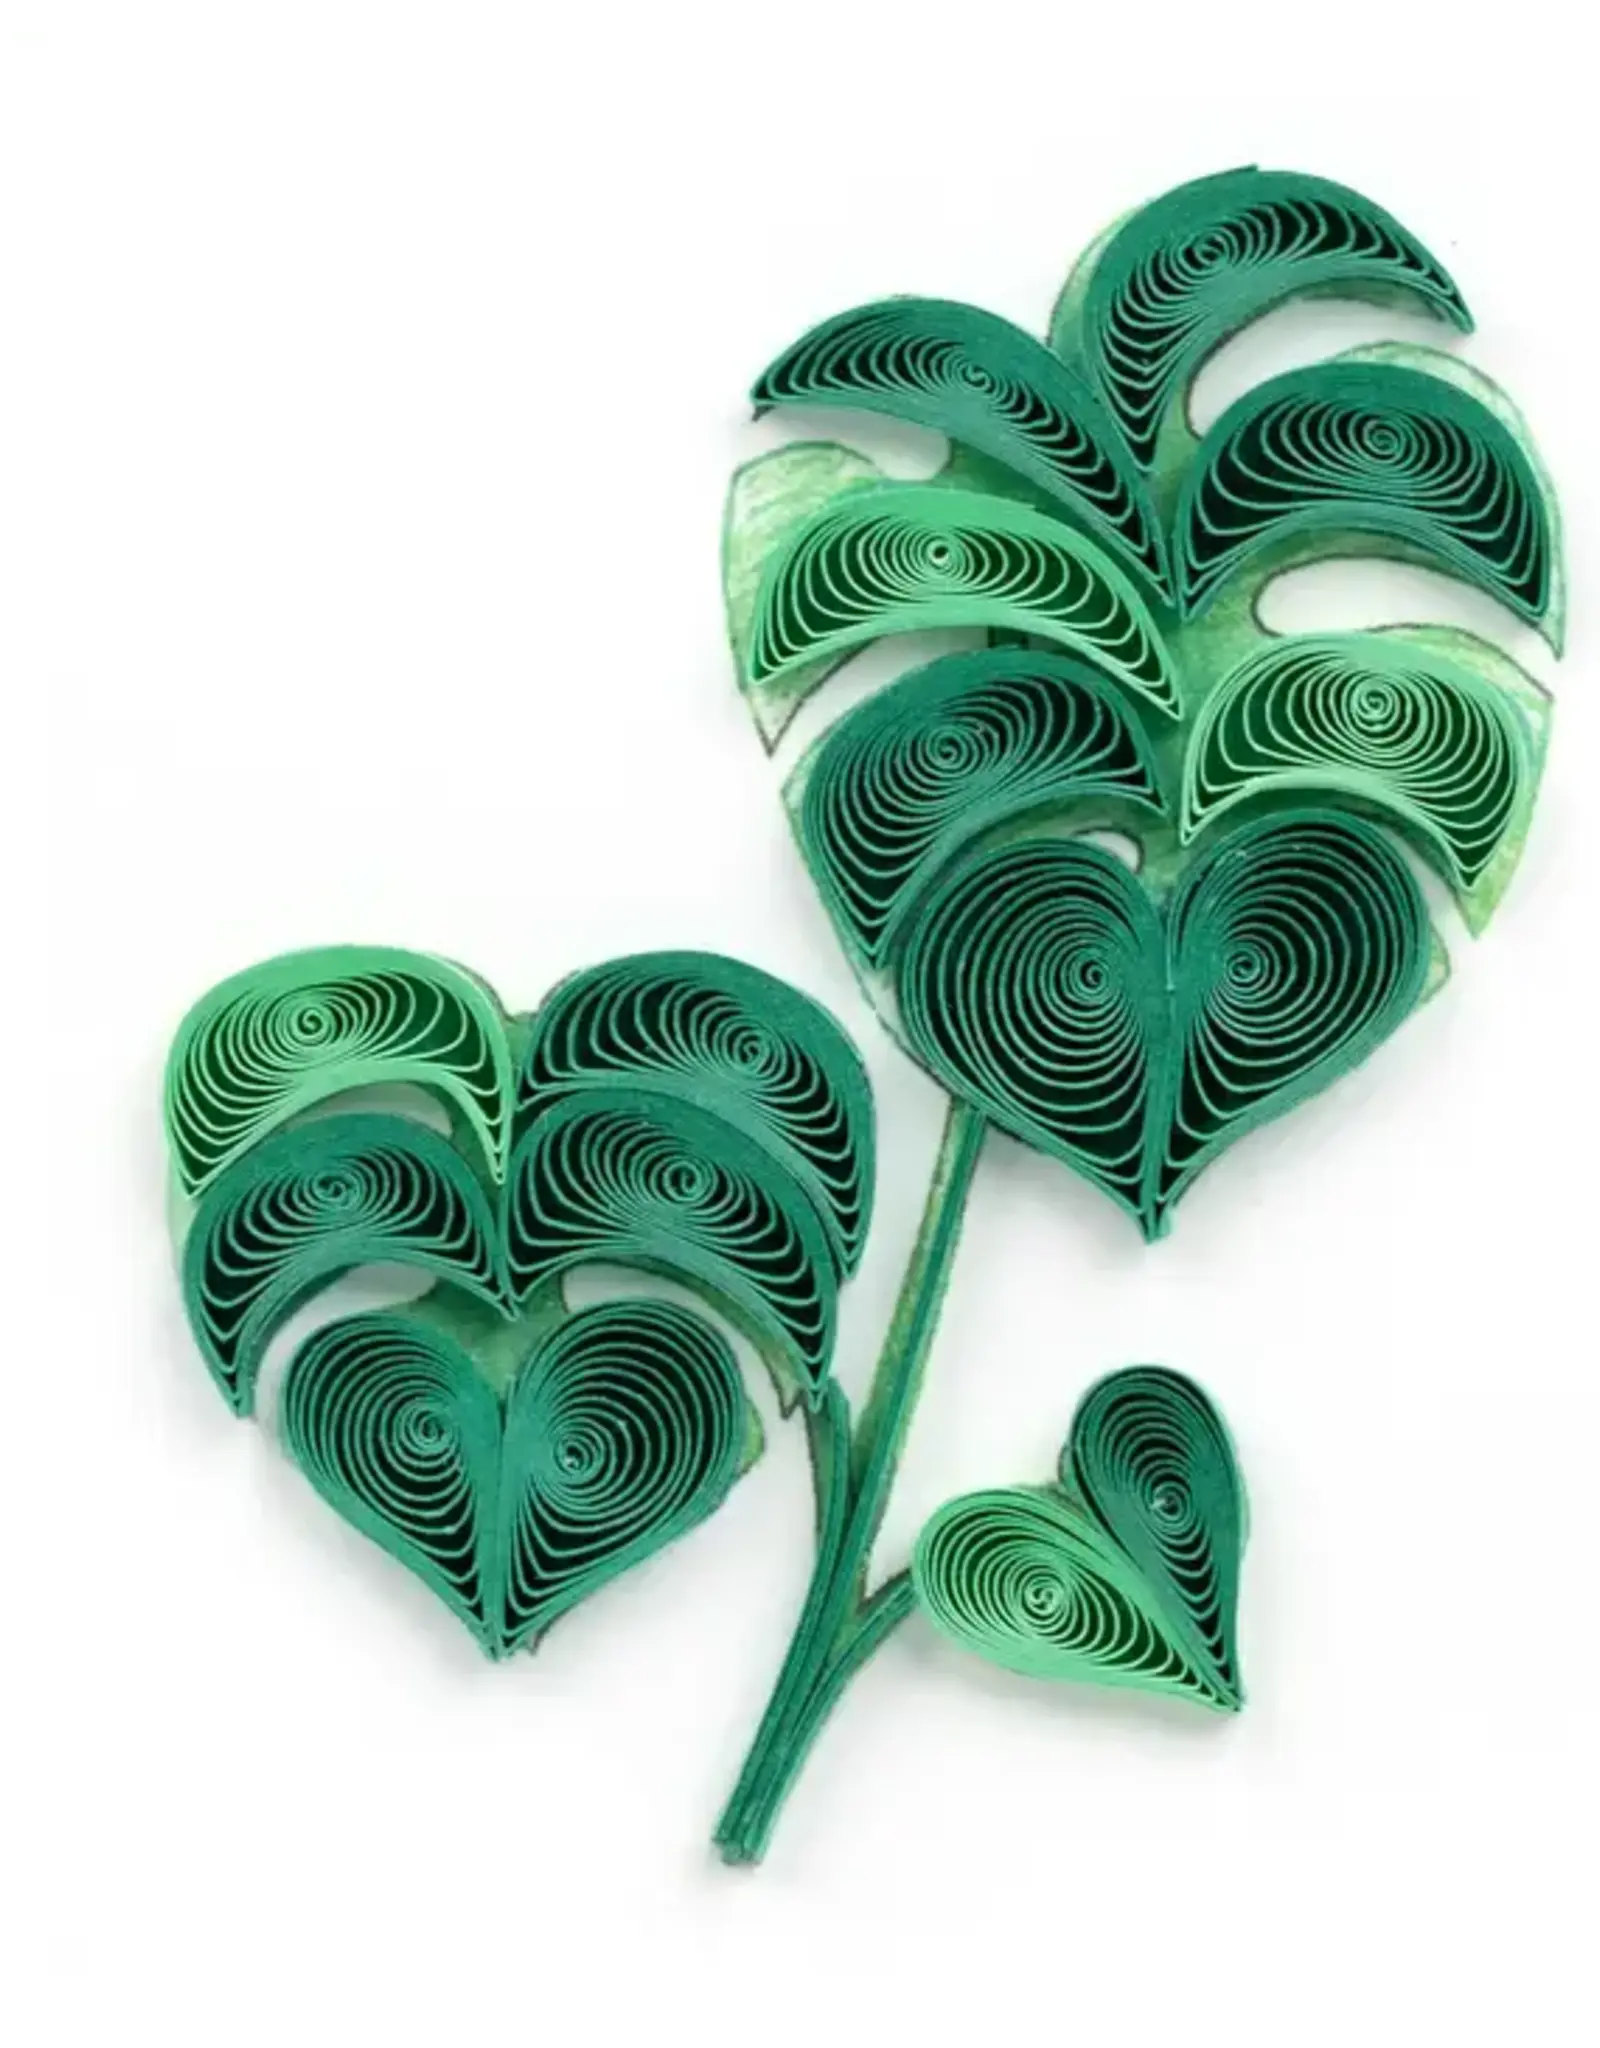 Quilling Card Monstera Leaf Gift Enclosure Mini Card